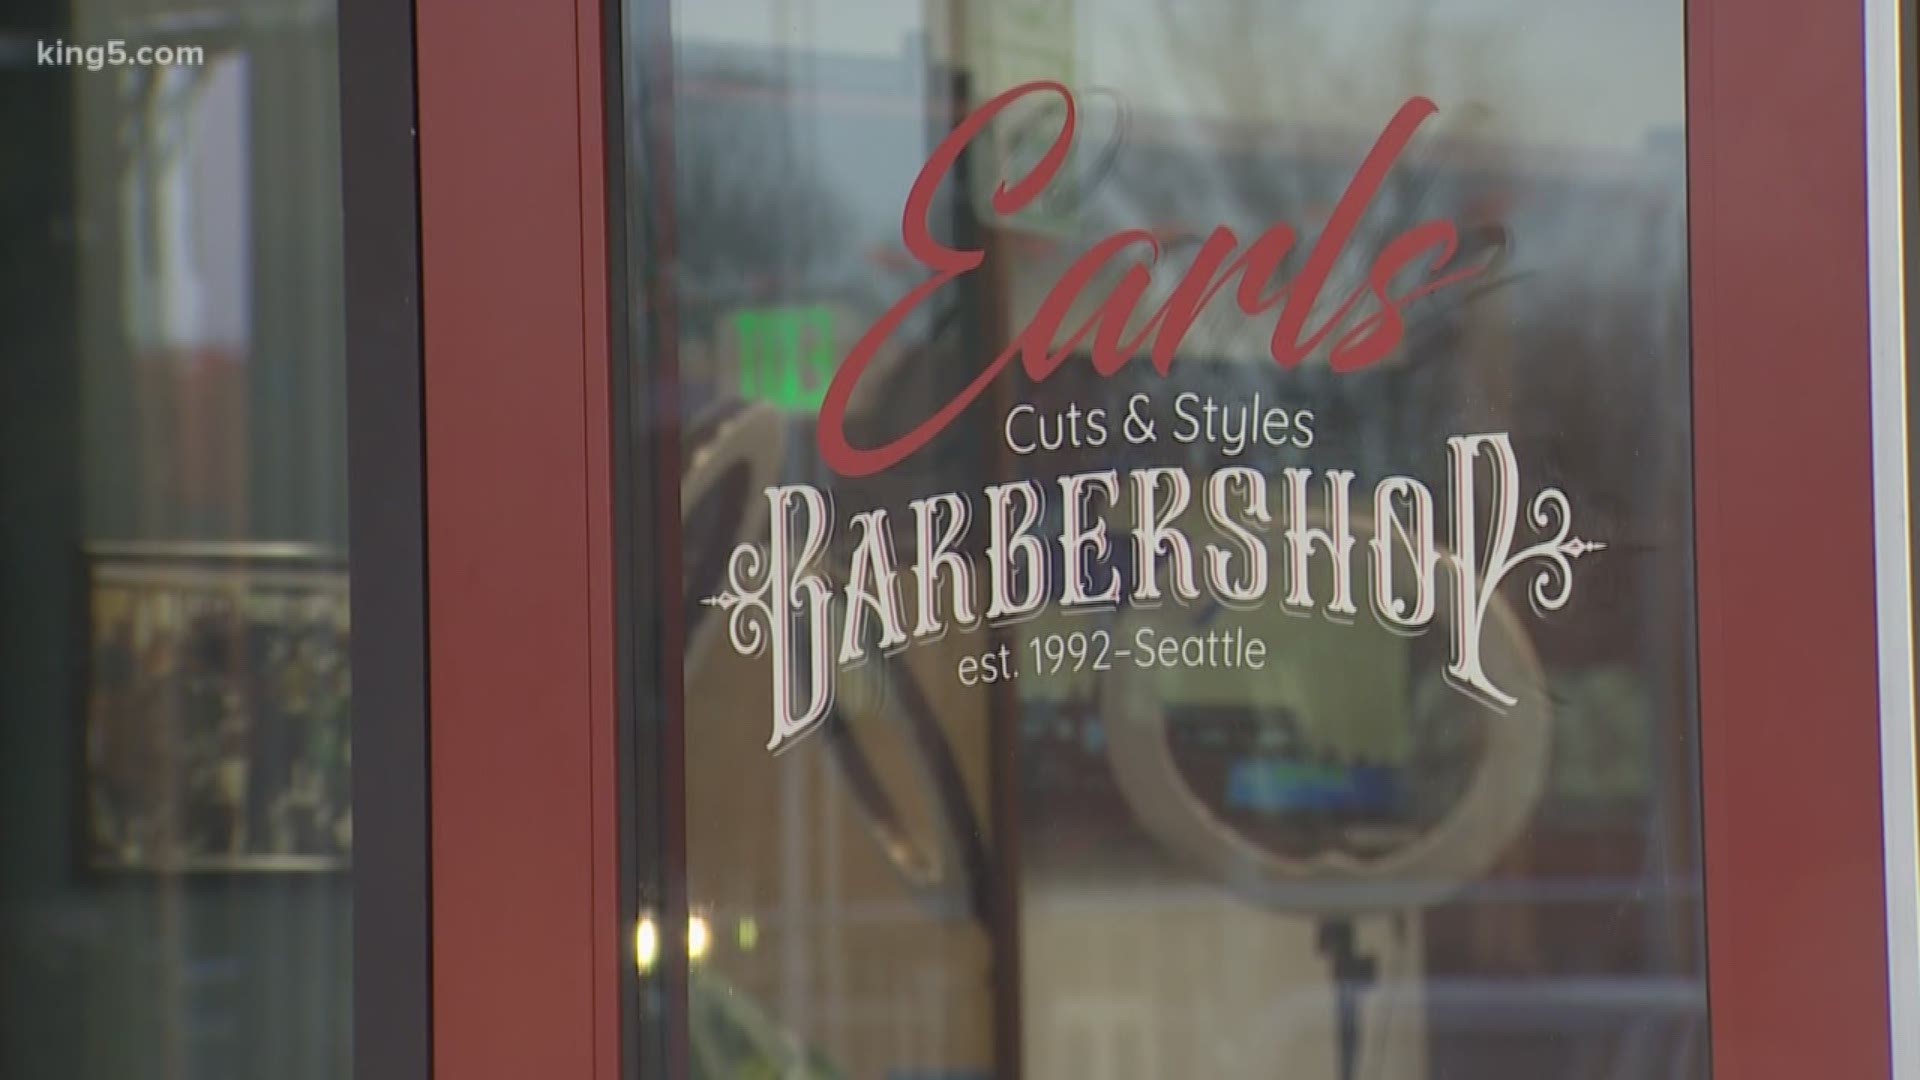 Earl's Cuts and Styles has been an institution in Seattle's Central District since 1992. It's a classic example of a barbershop as a neighborhood social hub.